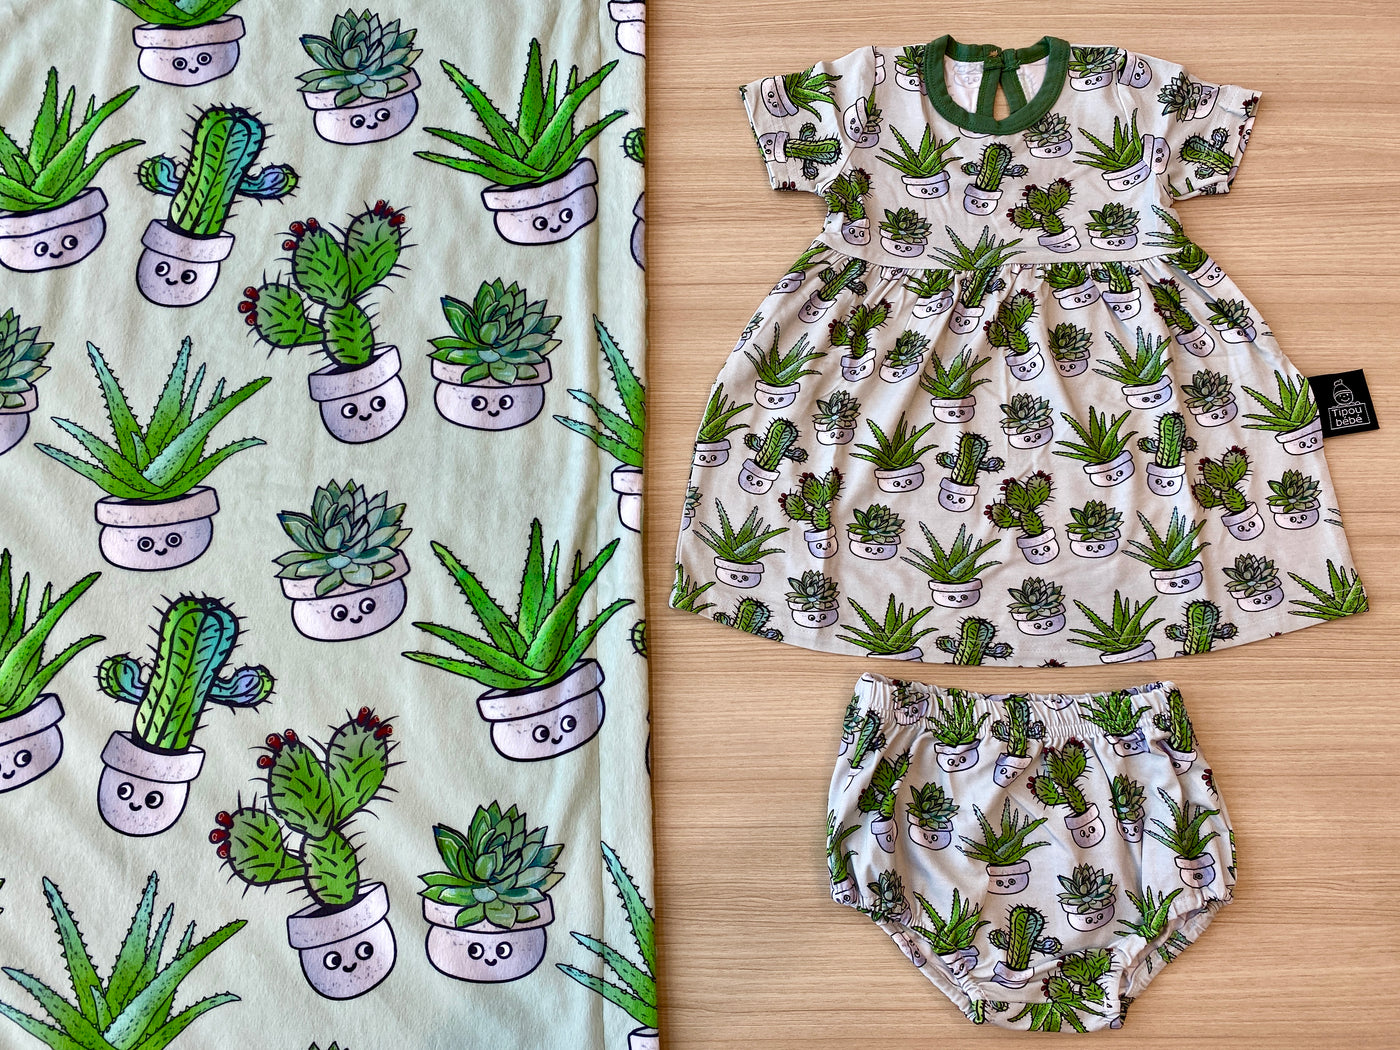 Soft Bamboo Dress : Soft Cactus and Succulent Plants Sage Green